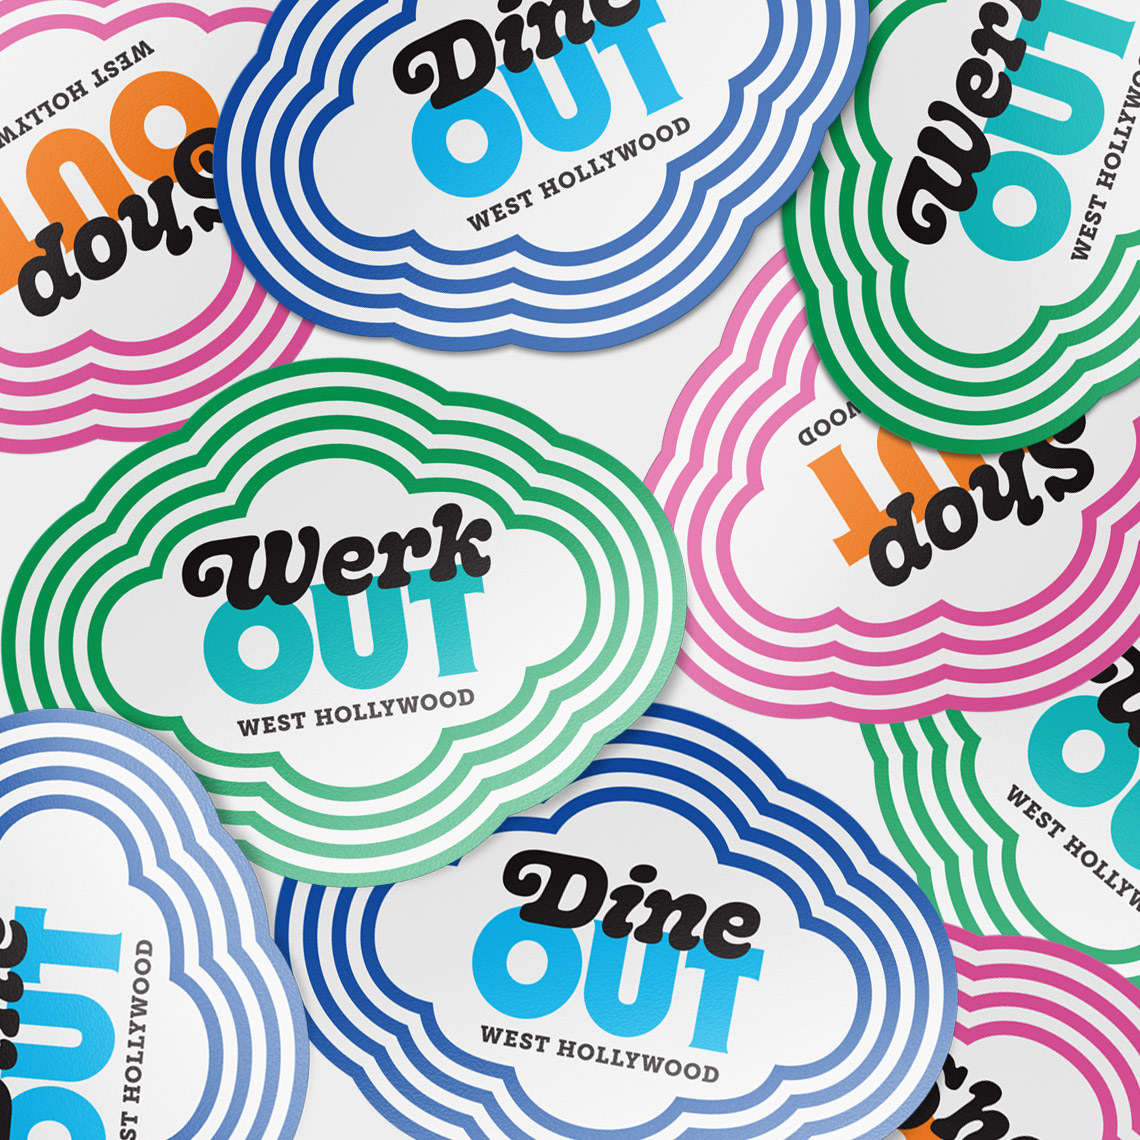 WeHO Out stickers. Branding and design by Kilter.